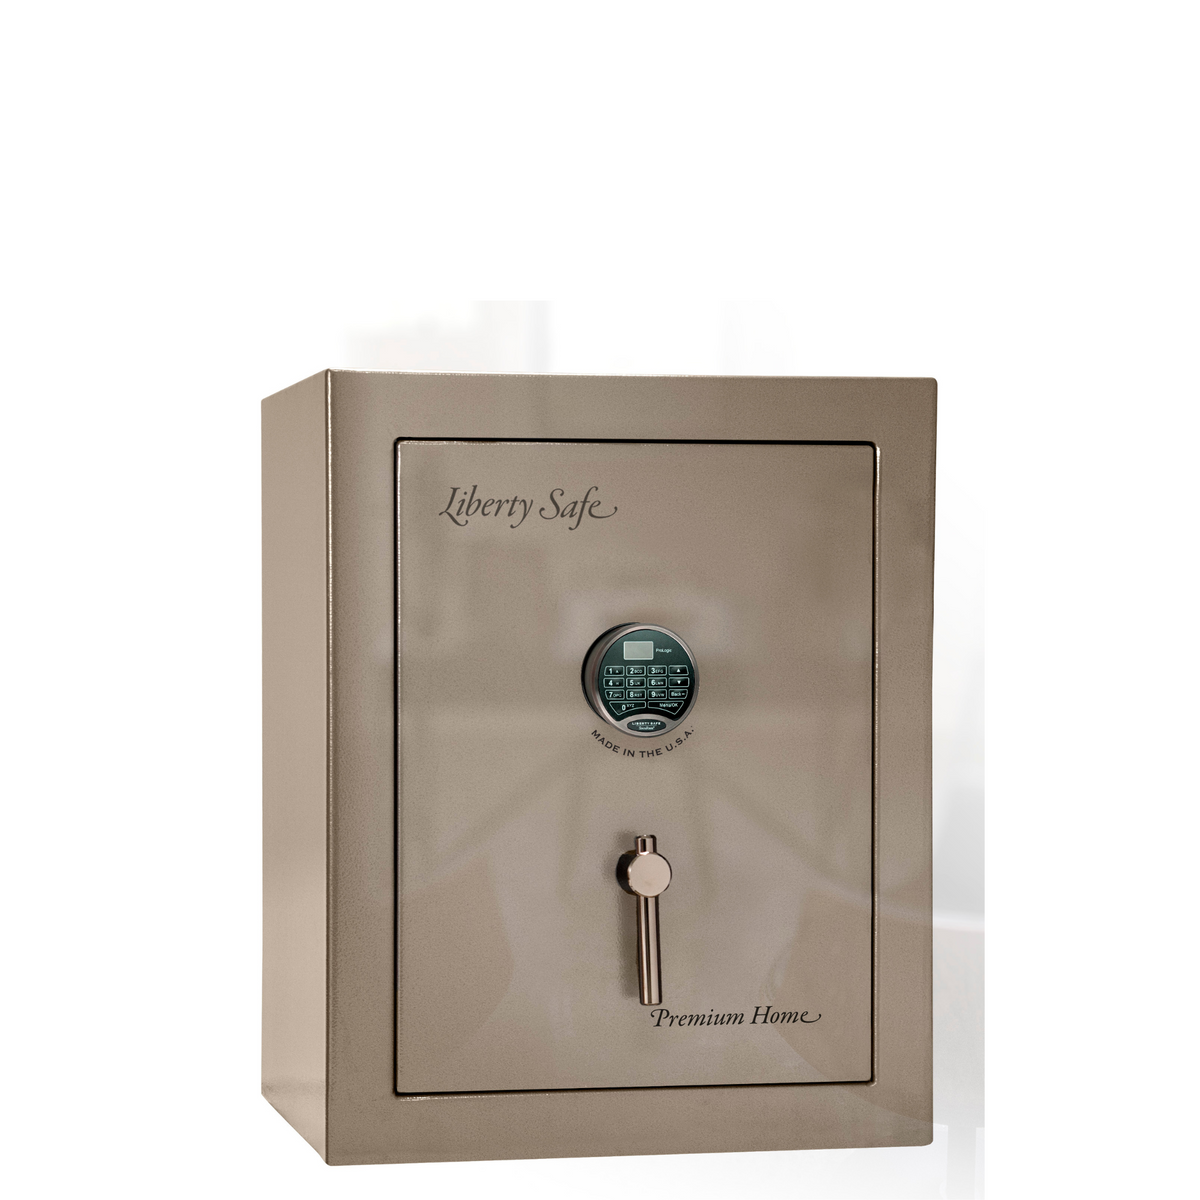 Premium Home Series | Level 7 Security | 2 Hour Fire Protection | 08 | Dimensions: 29.75&quot;(H) x 24.5&quot;(W) x 19&quot;(D) | Champagne Gloss - Closed Door